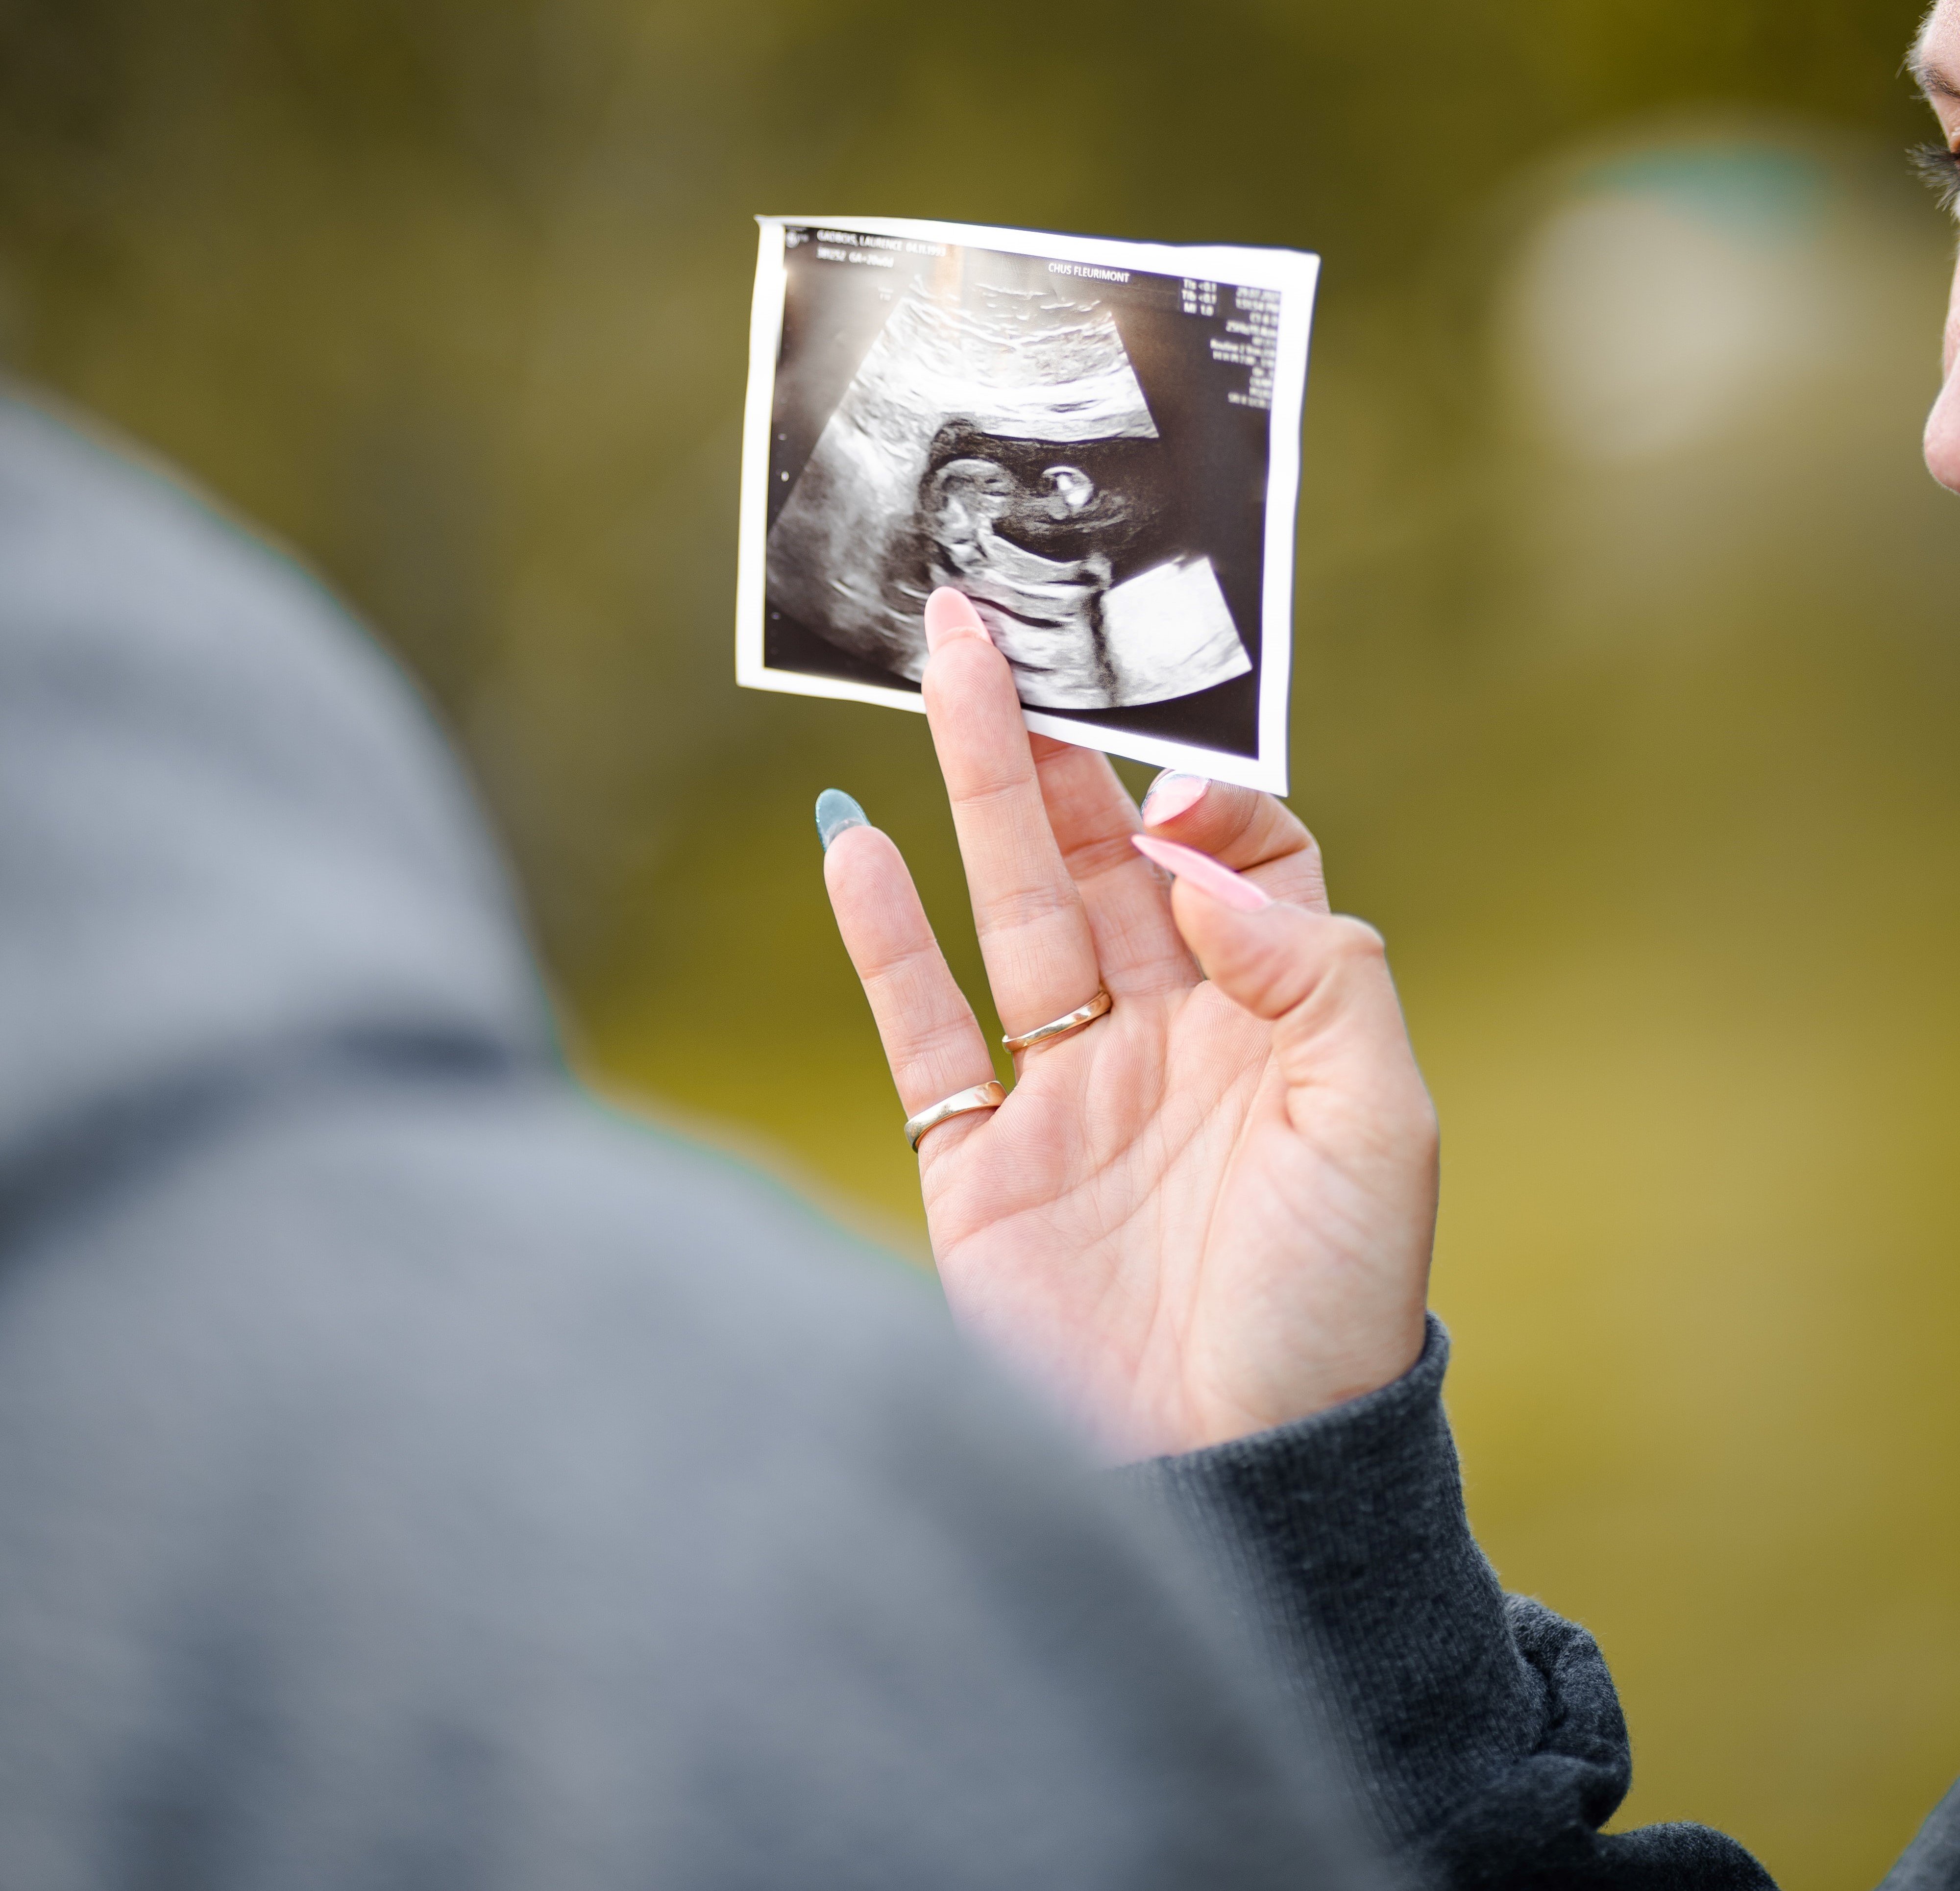 A scan revealed they were having twins. | Source: Unsplash